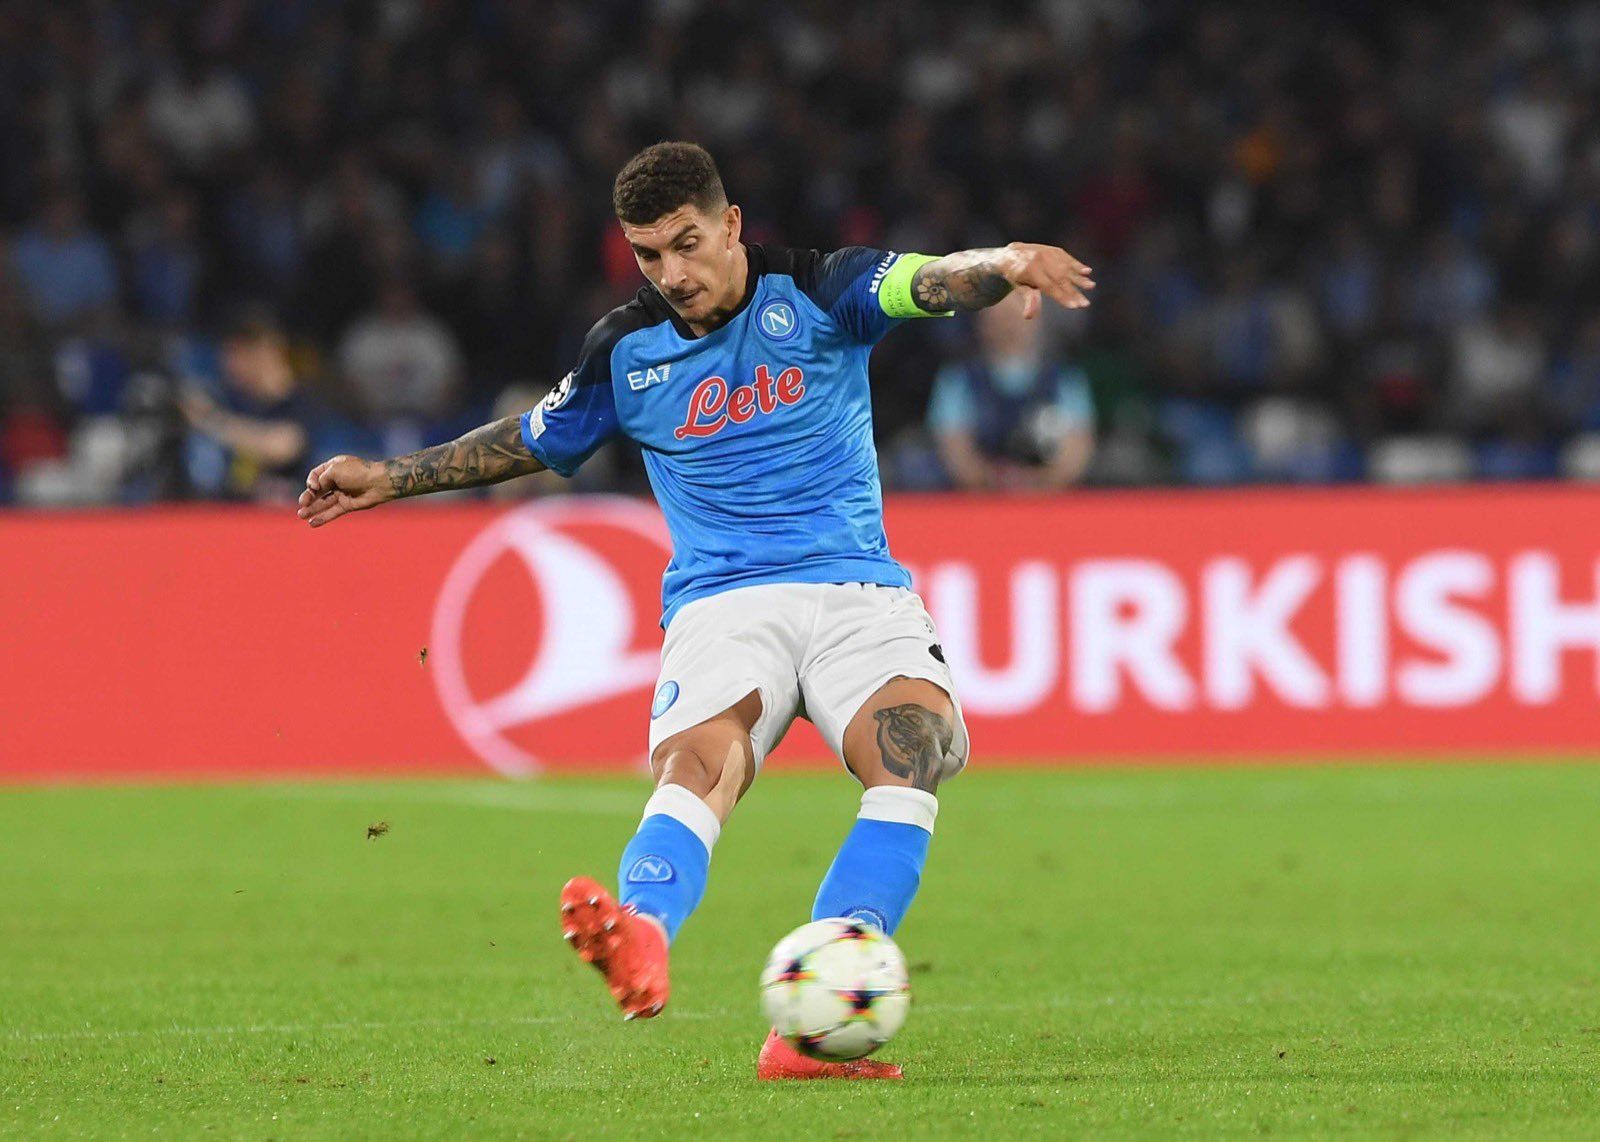 Napoli vs Sassuolo: Prediction, Odds, Betting Tips, and How to Watch | 29/10/2022